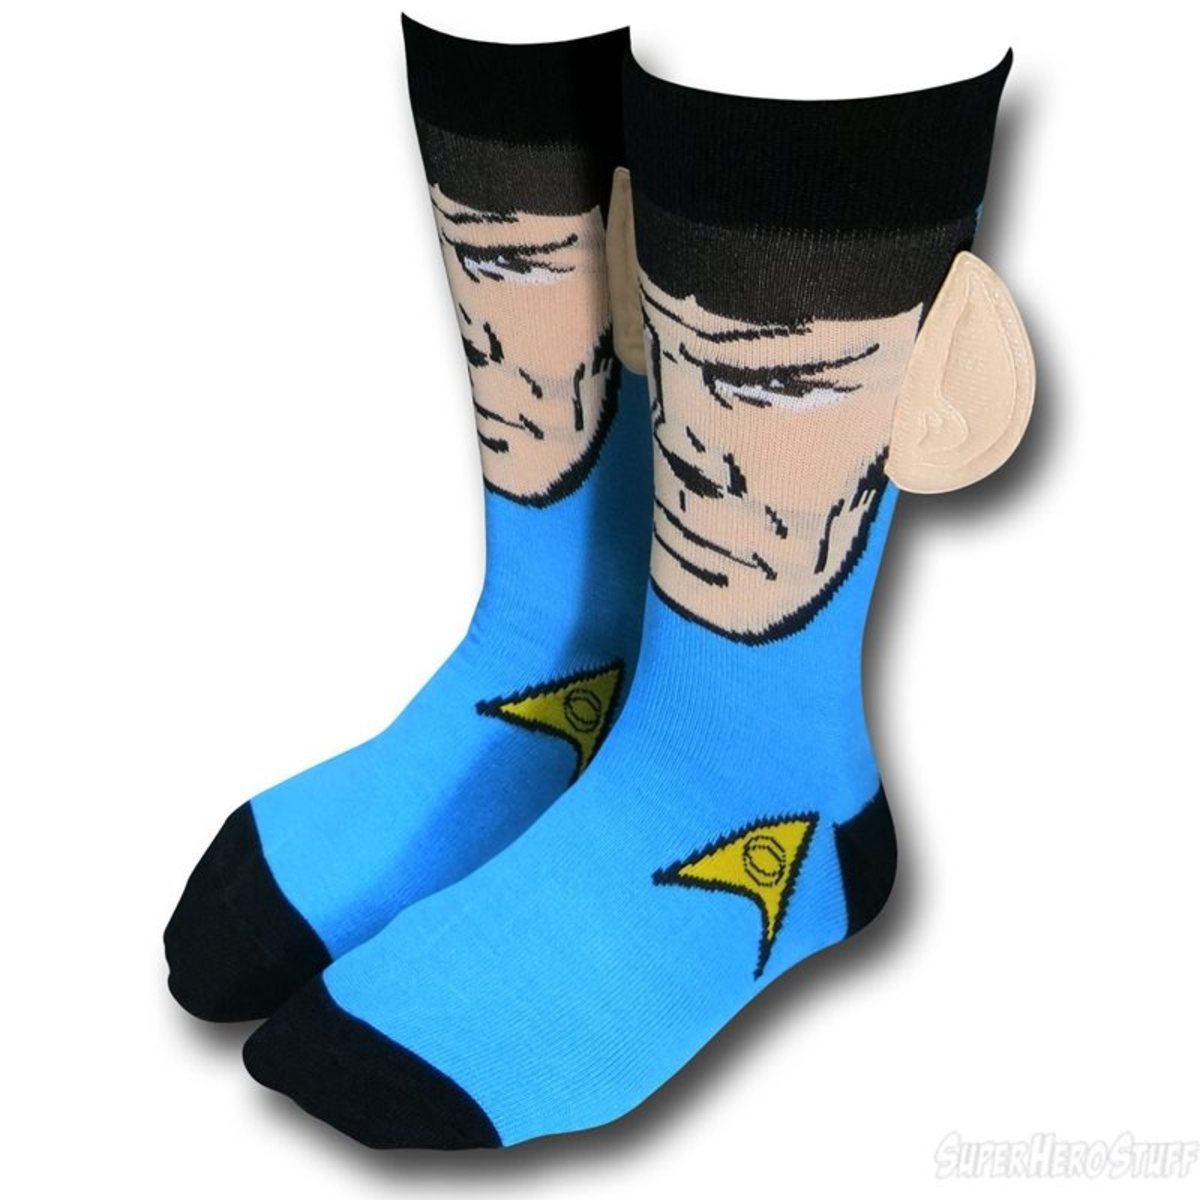 Can you believe there are Spock socks that have his Vulcan Ears on them?   These socks seem like a logical gift idea, don't you agree? The ears on these socks are killing me!!